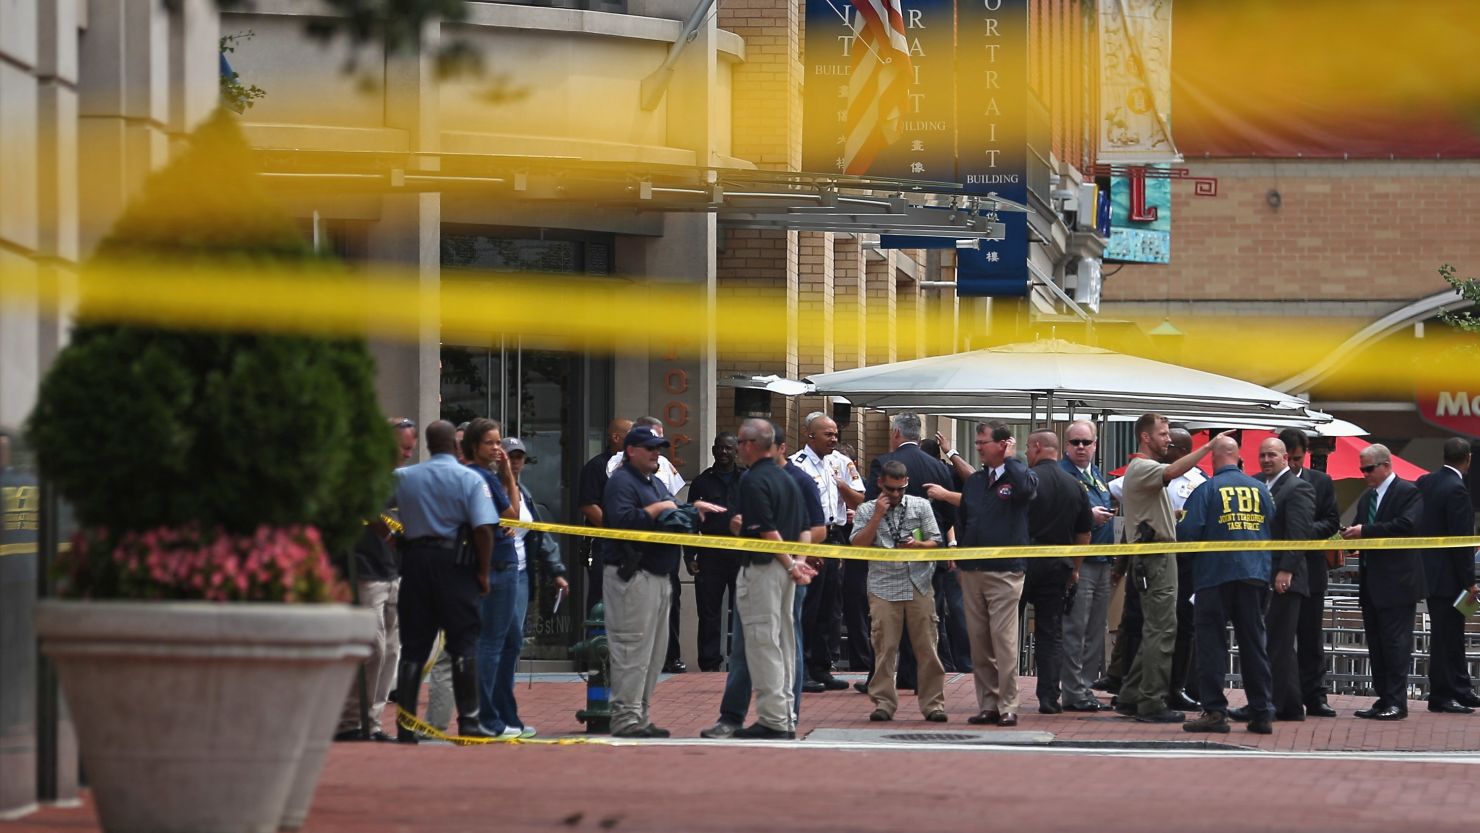 Local and federal investigators work to gather evidence after a security guard was shot in the arm at the headquarters of the Family Research Council on August 15, 2012 in Washington.